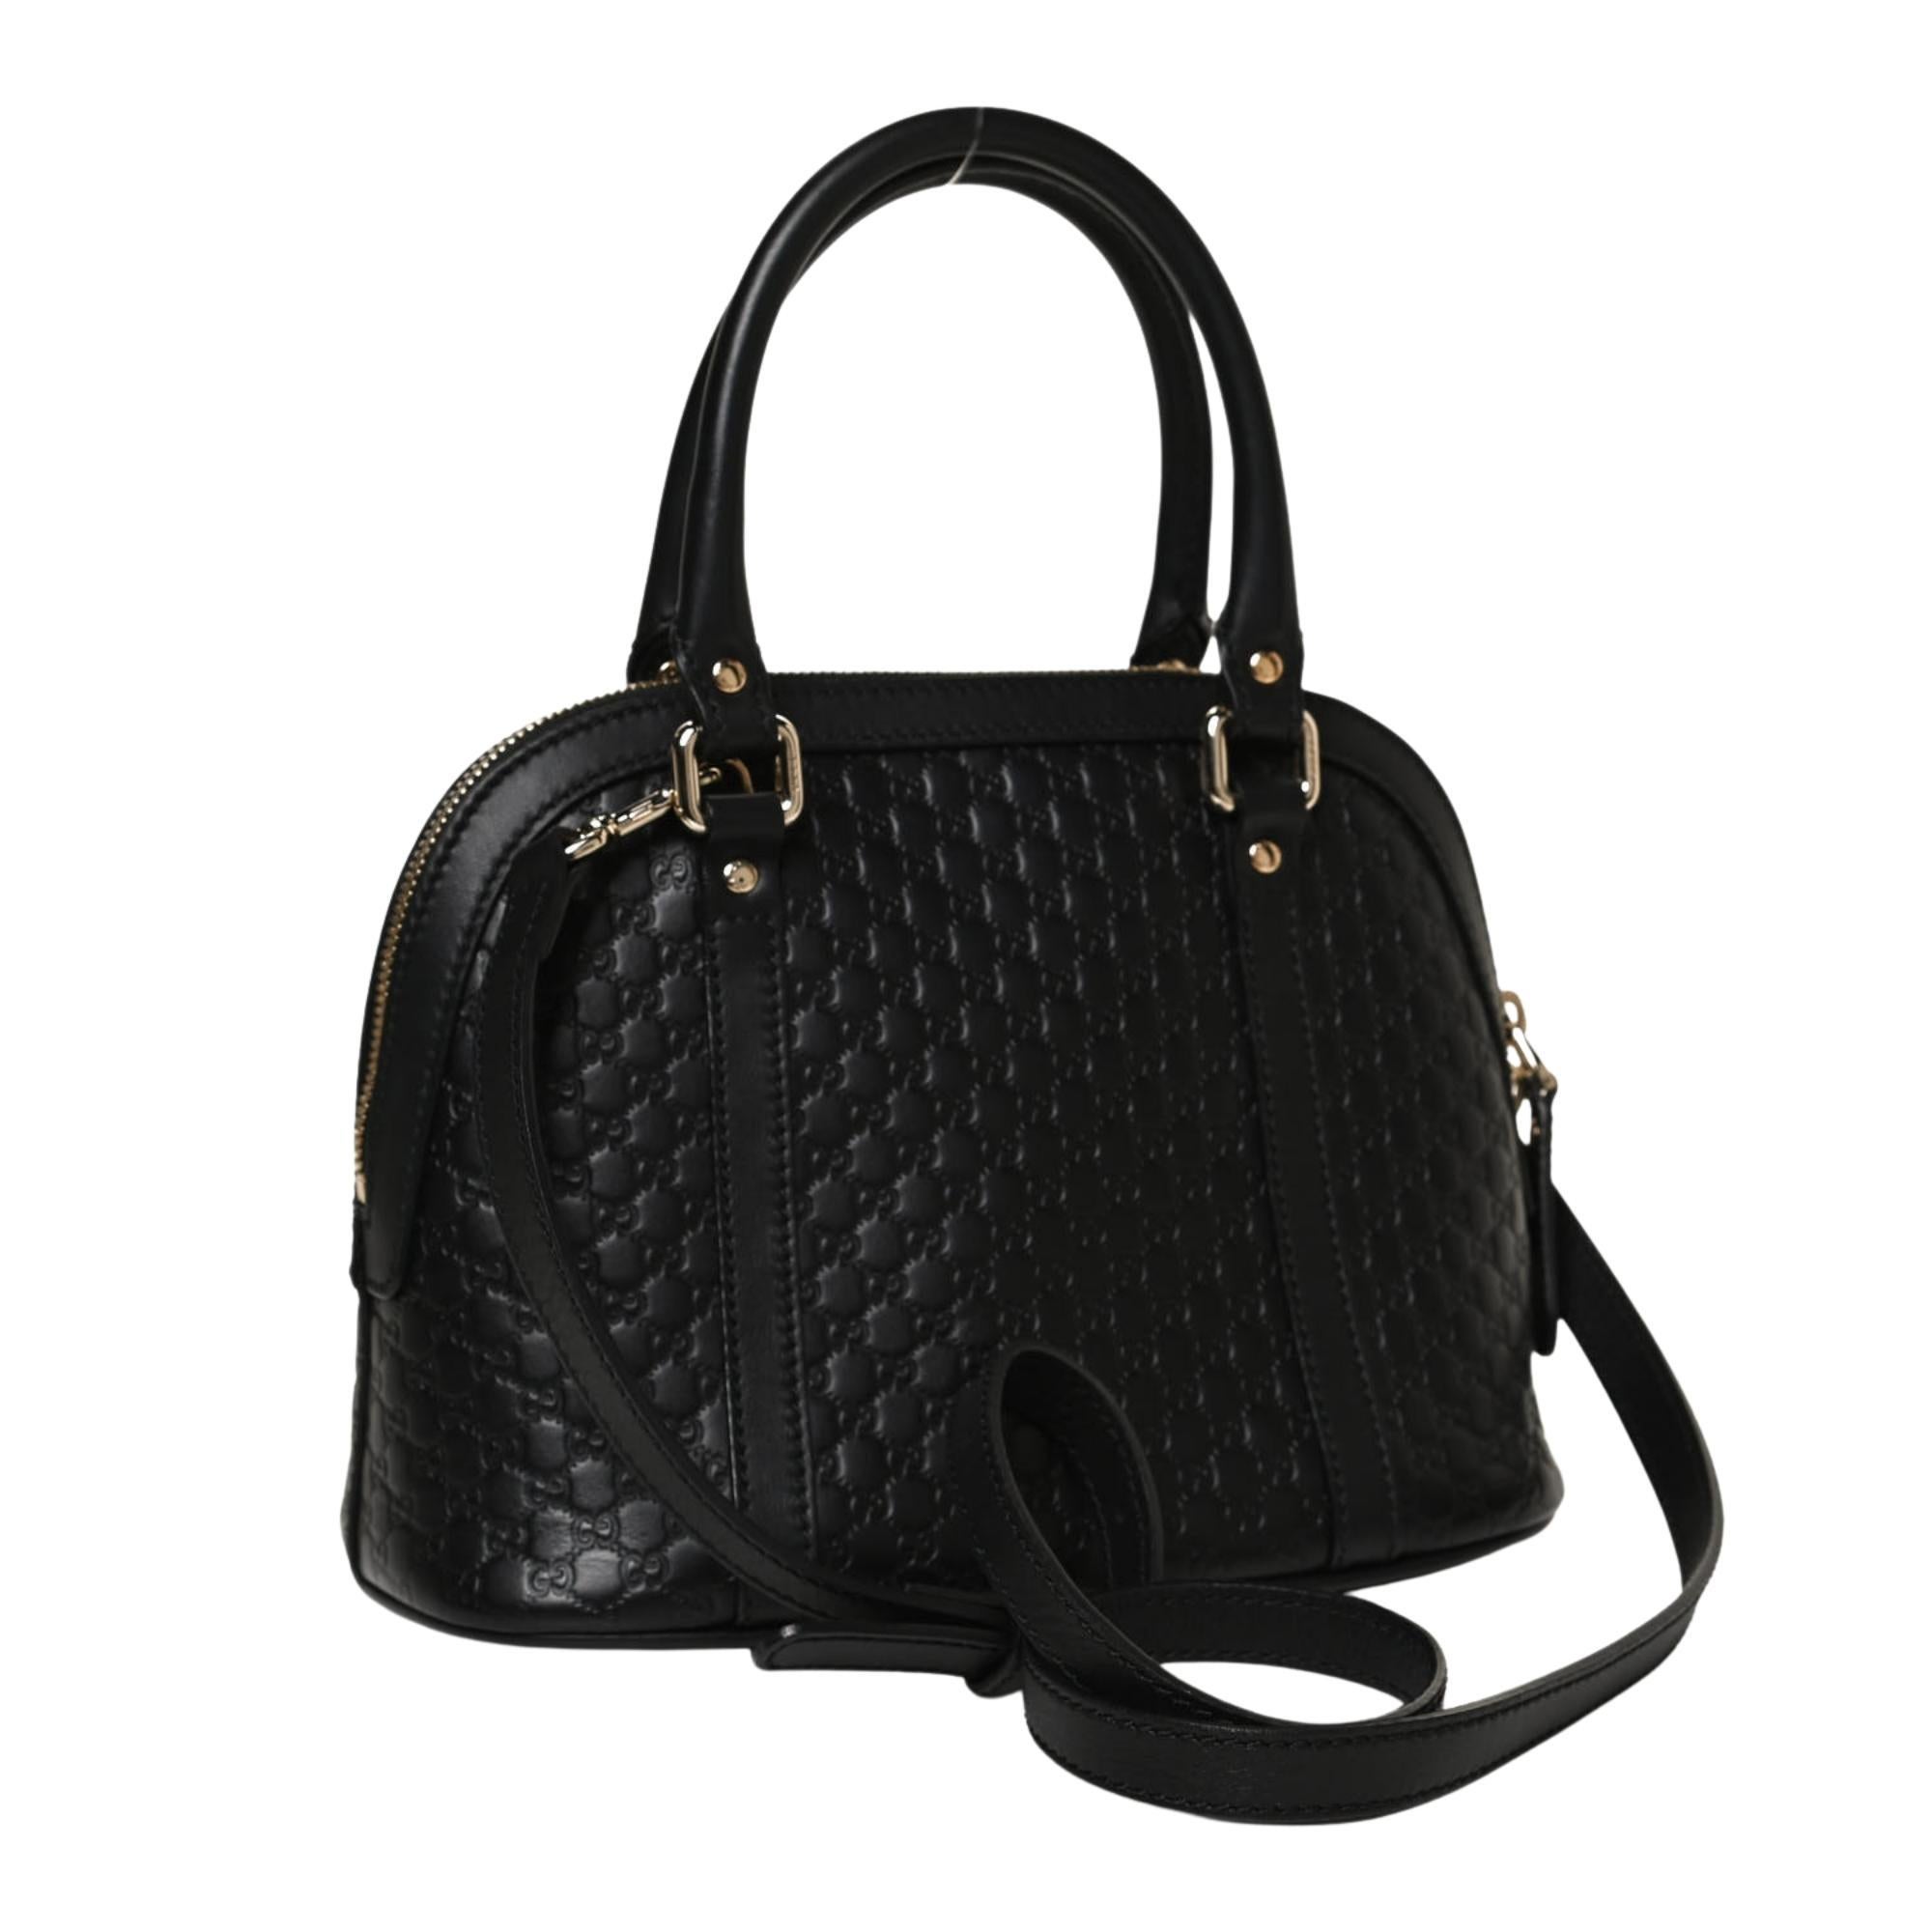 This bag is constructed of embossed microguccissima leather in black. The bag features rolled leather top handles, an optional shoulder strap, and gold hardware. The zipper opens to a spacious beige fabric interior with a patch pocket.

COLOR: